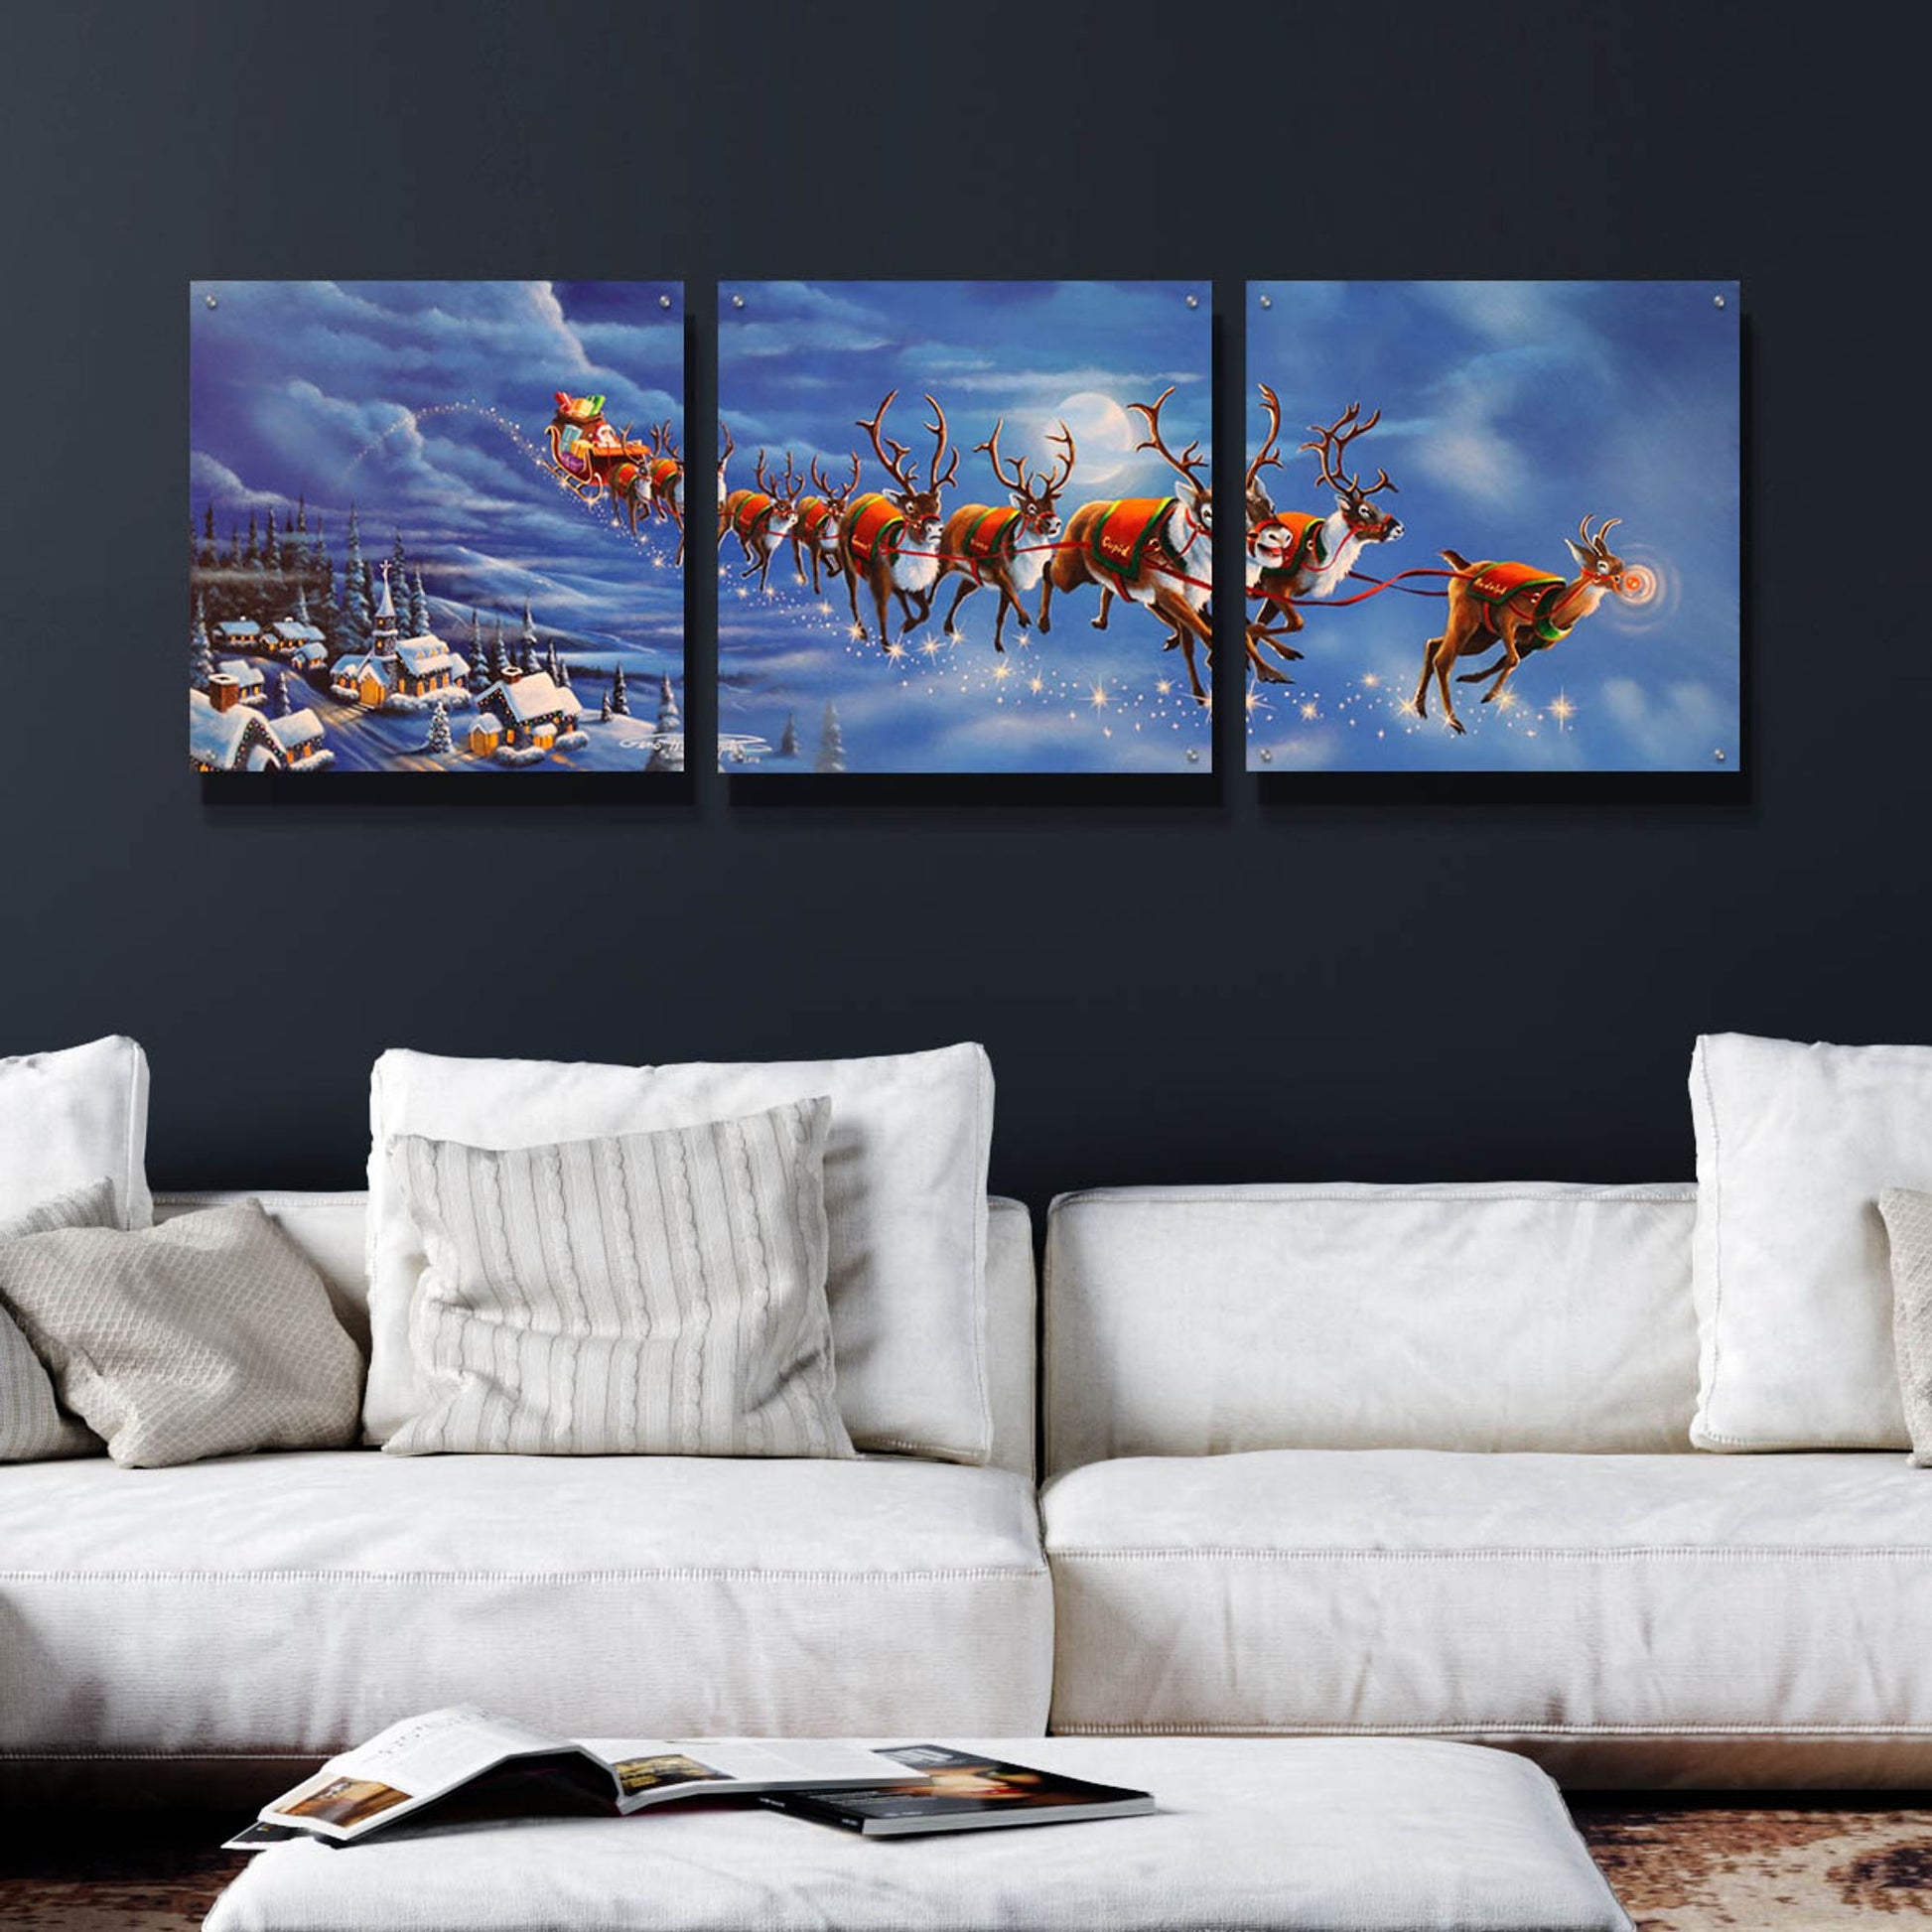 Epic Art 'Twas The Night Before Christmas' by Geno Peoples, Acrylic Glass Wall Art, 3 Piece Set,72x24